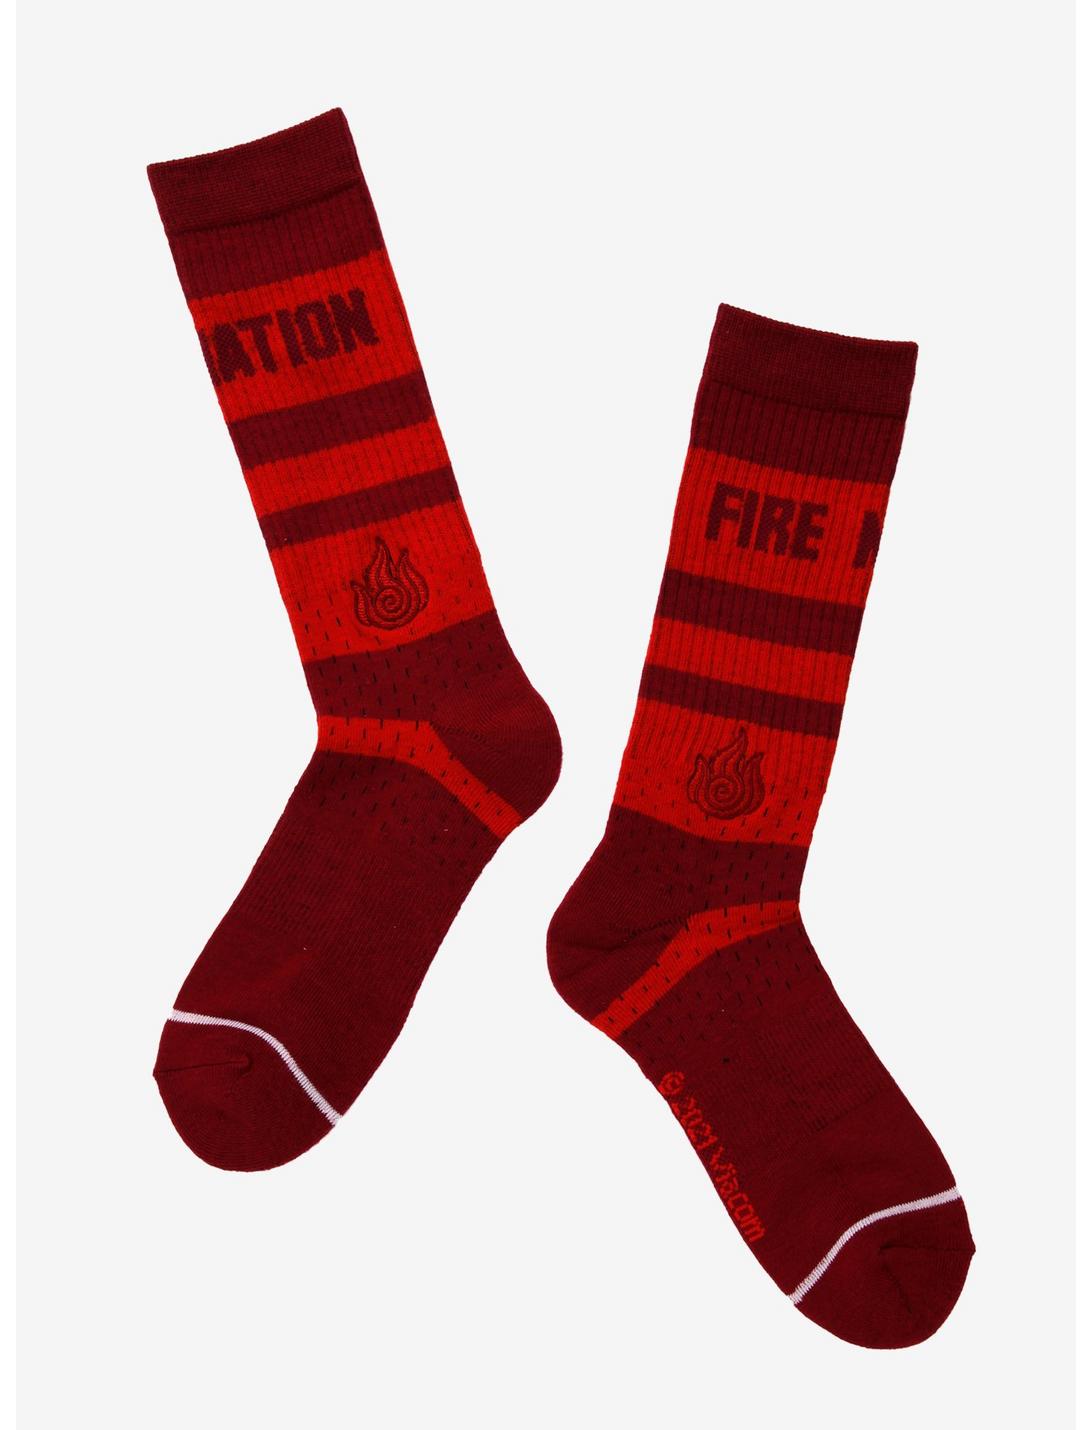 Avatar: The Last Airbender Fire Nation Colorblock Crew Socks - BoxLunch Exclusive, , hi-res